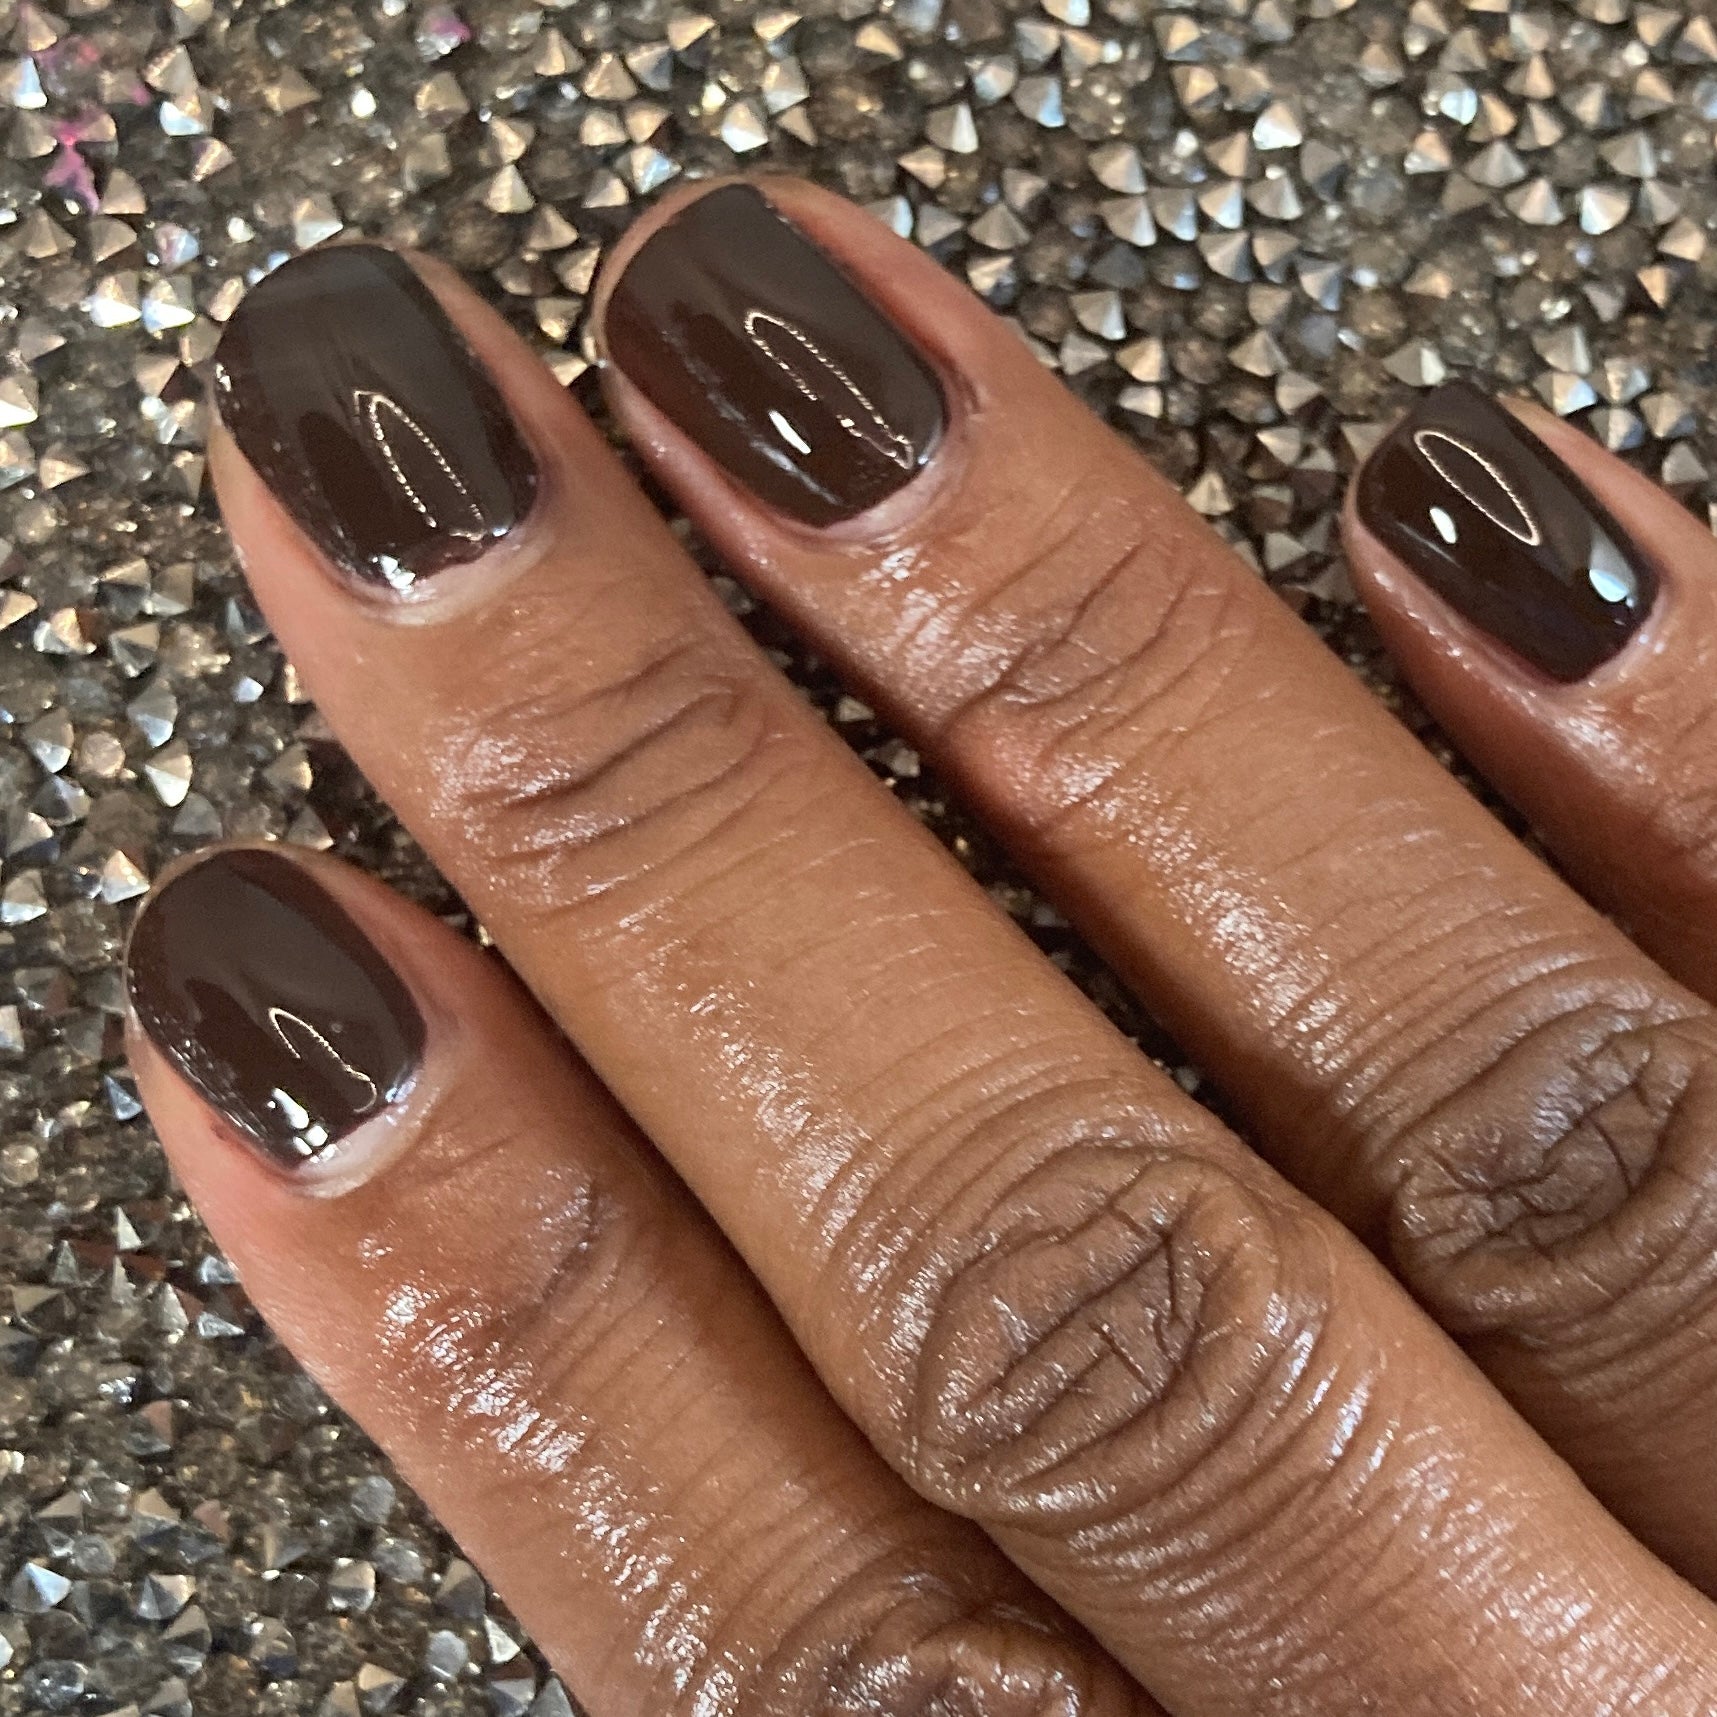 Dove Chocolate and Nicole By OPI Chocolate Manicure: Better After Dark &  Promises In The Dark | A Very Sweet Blog